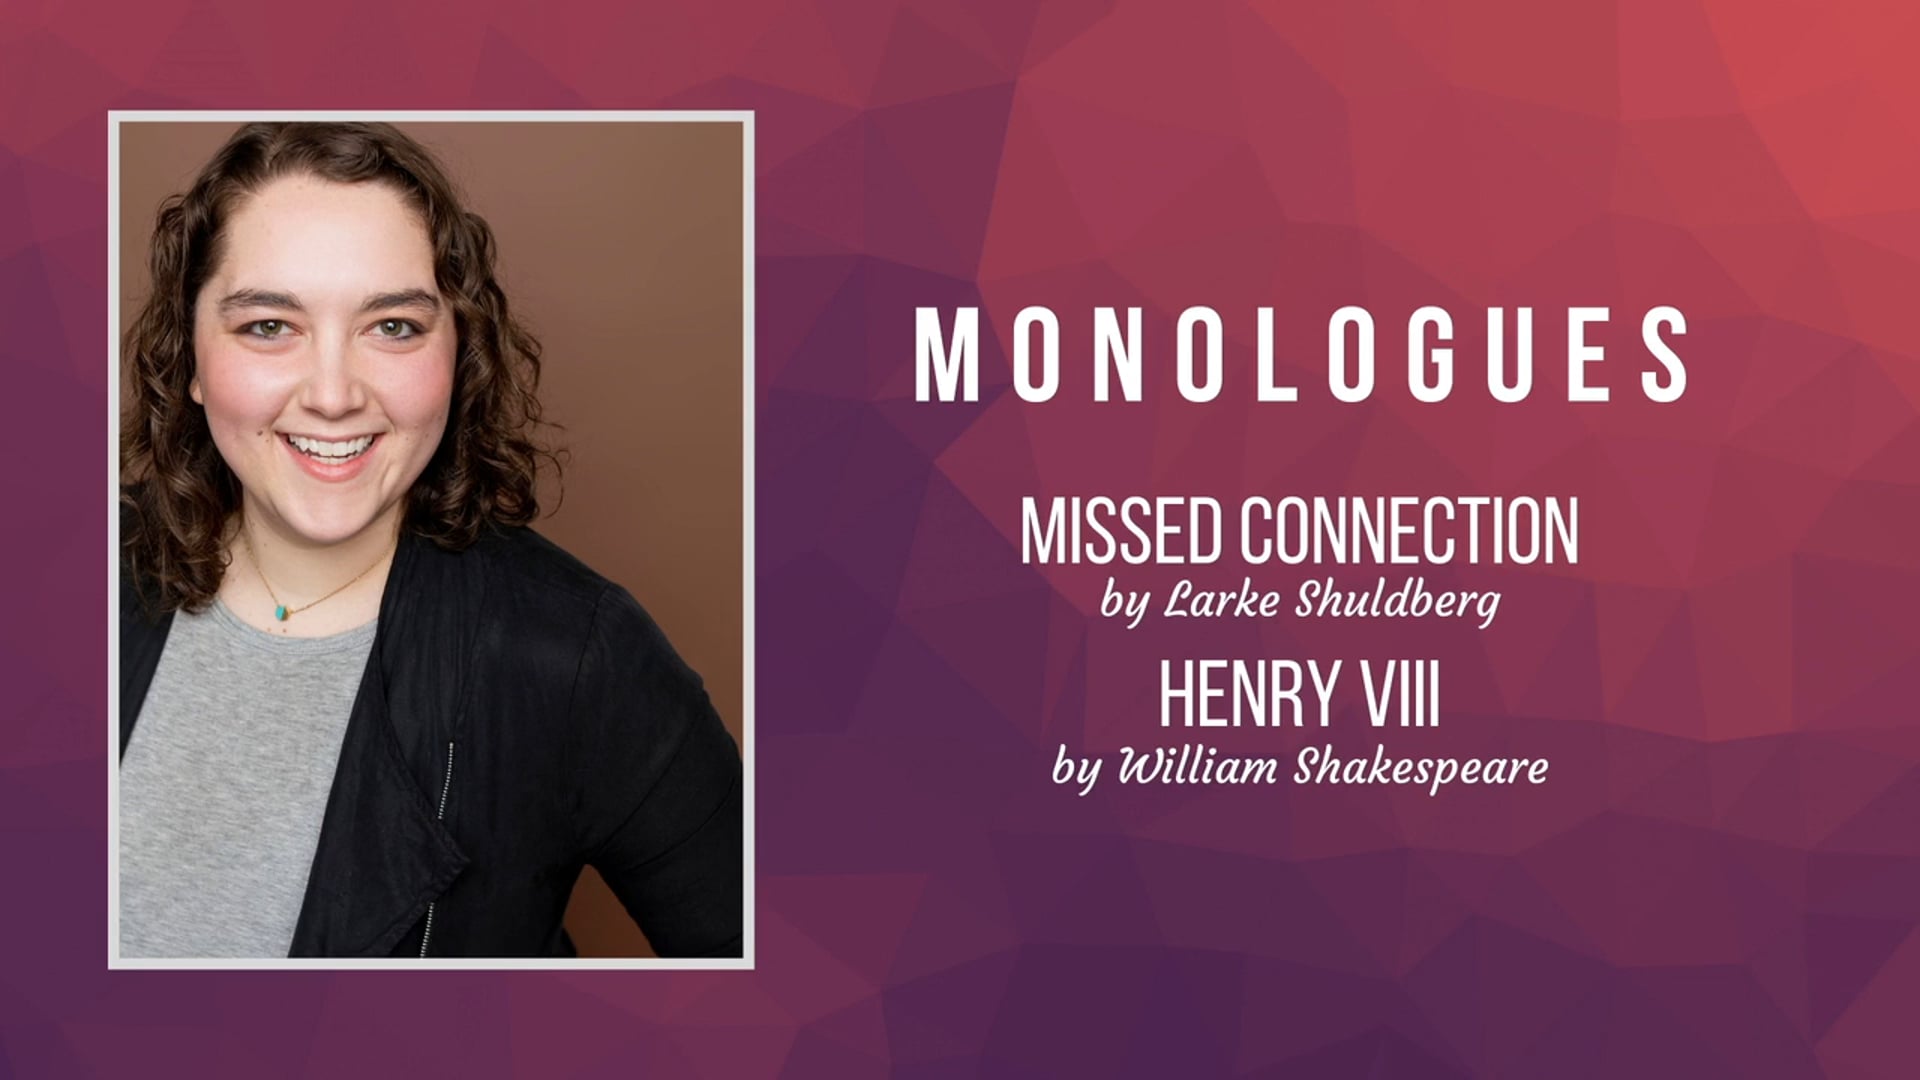 Effie: Missed Connection & Katherine: Henry VII Monologues